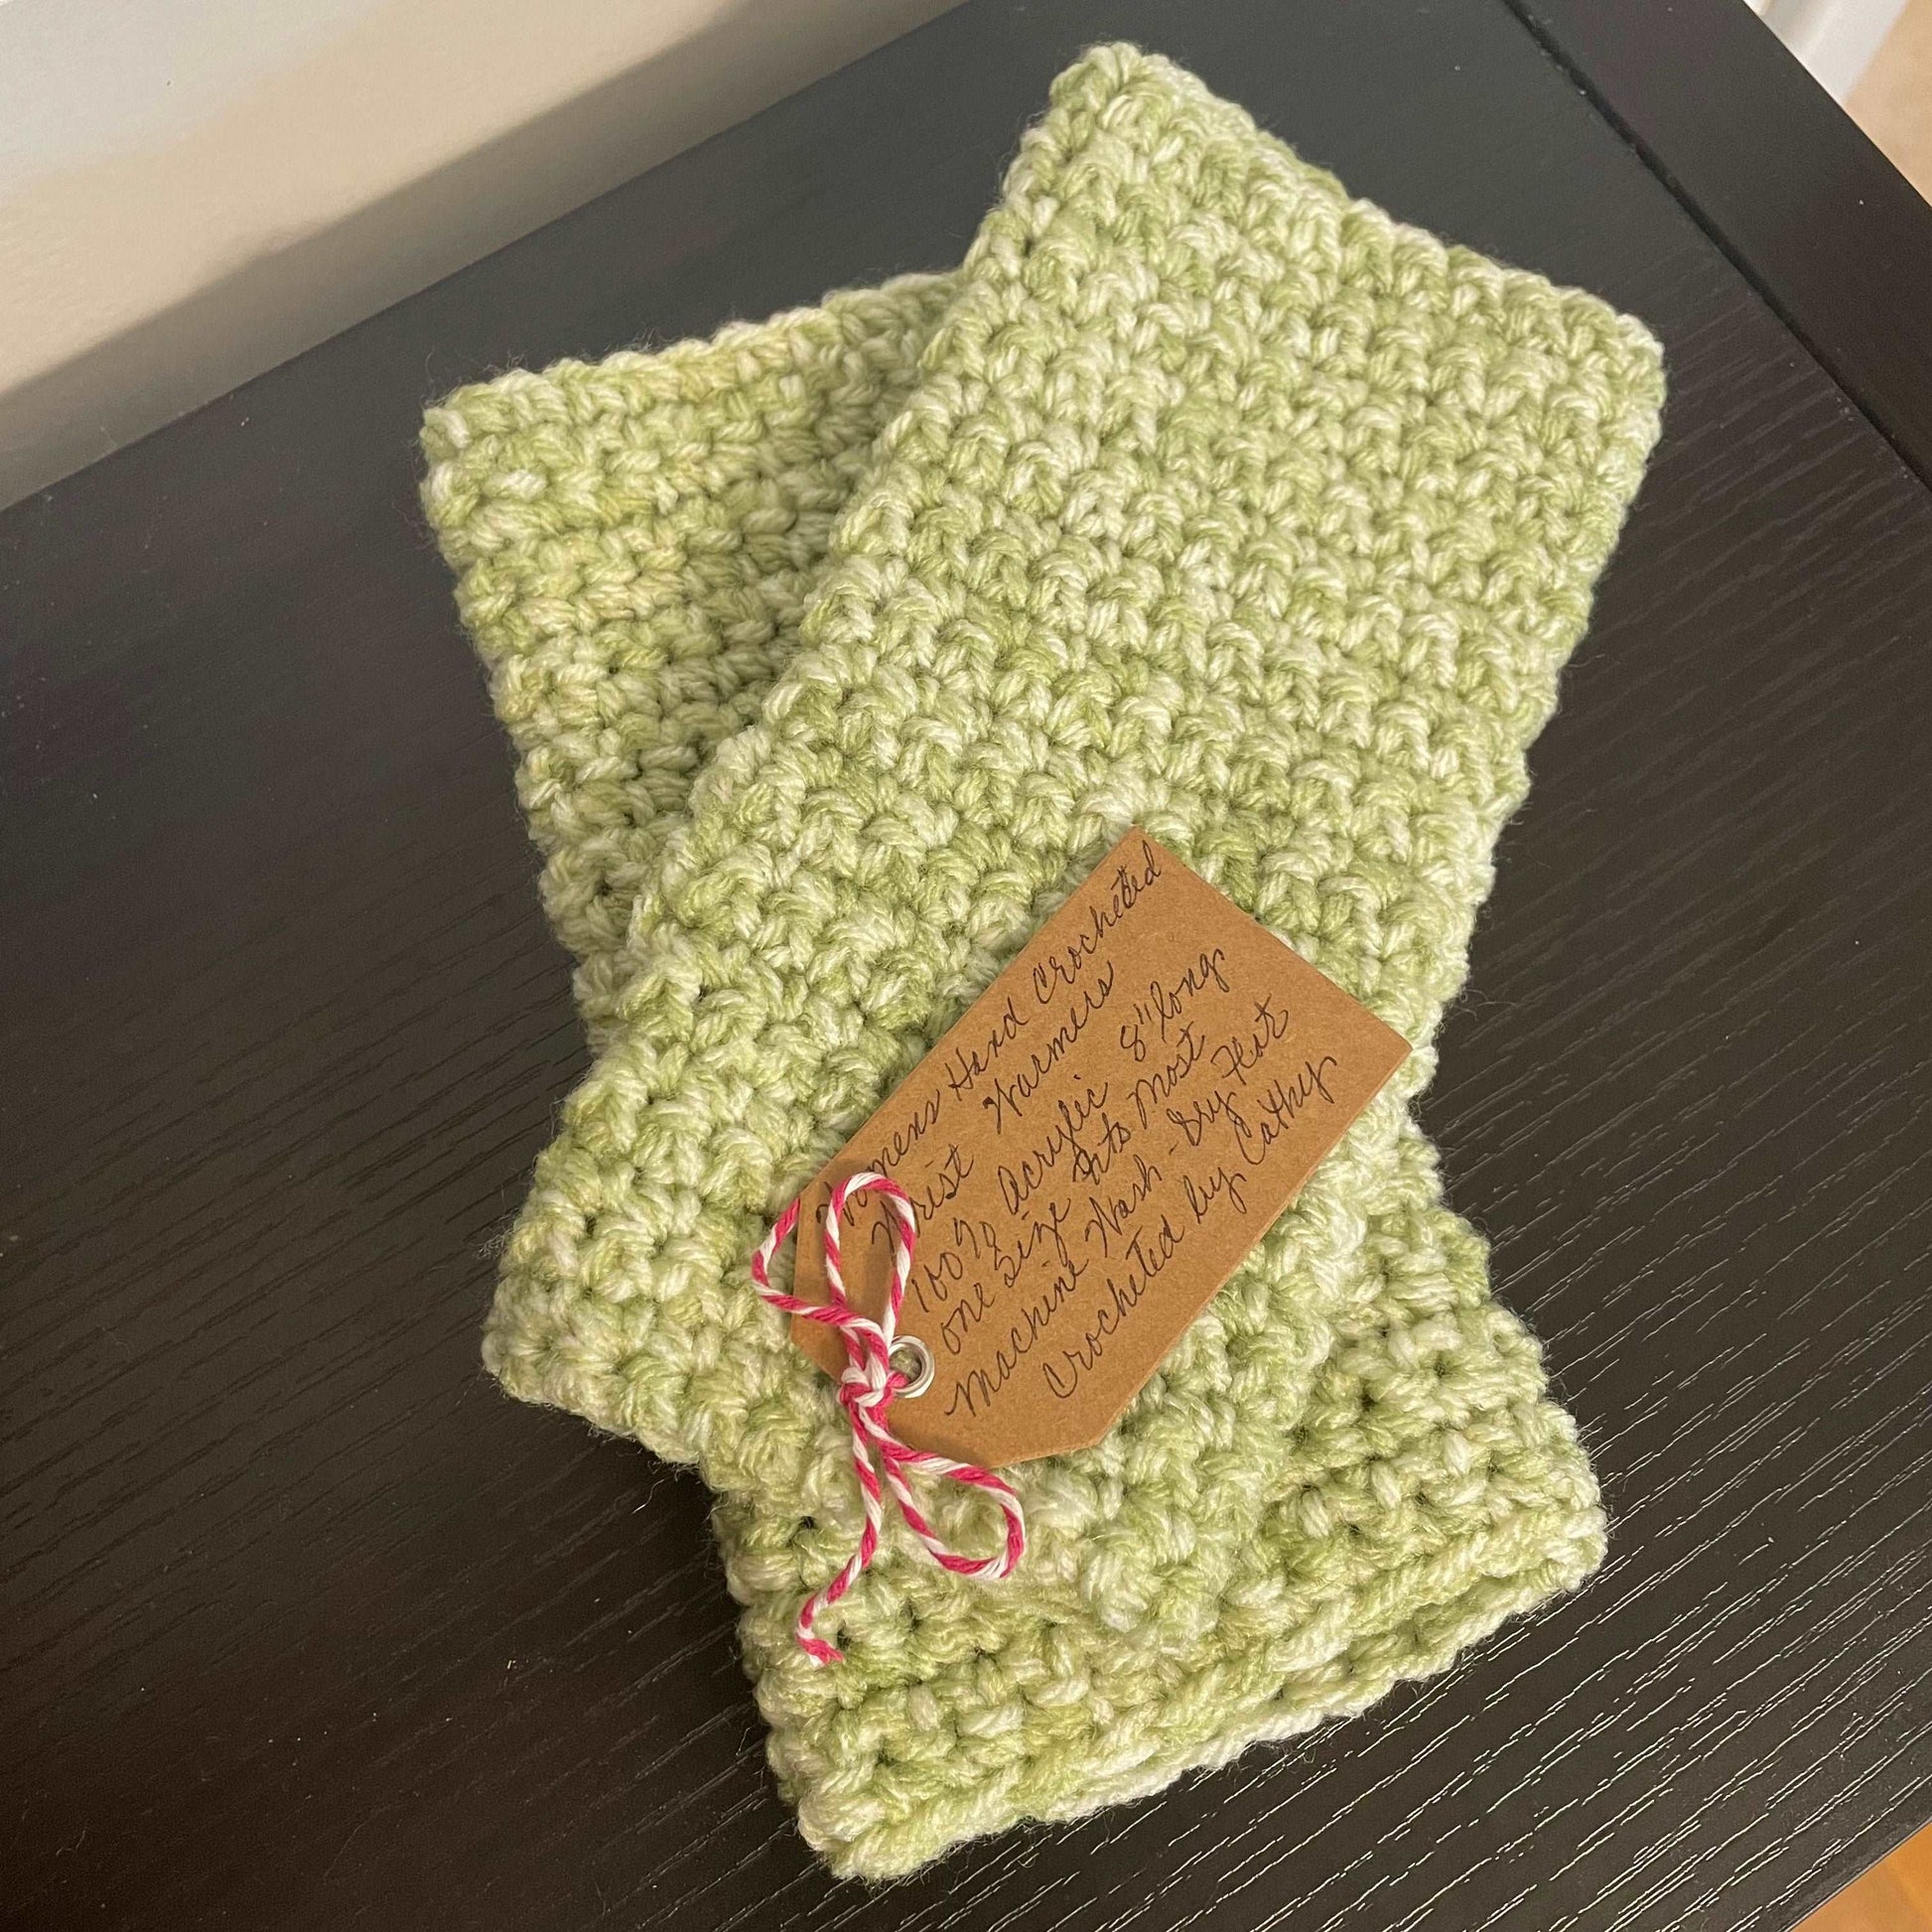 Fingerless Gloves in Lime Green Marble Gaming Texting Hand Crocheted Wrist Warmers